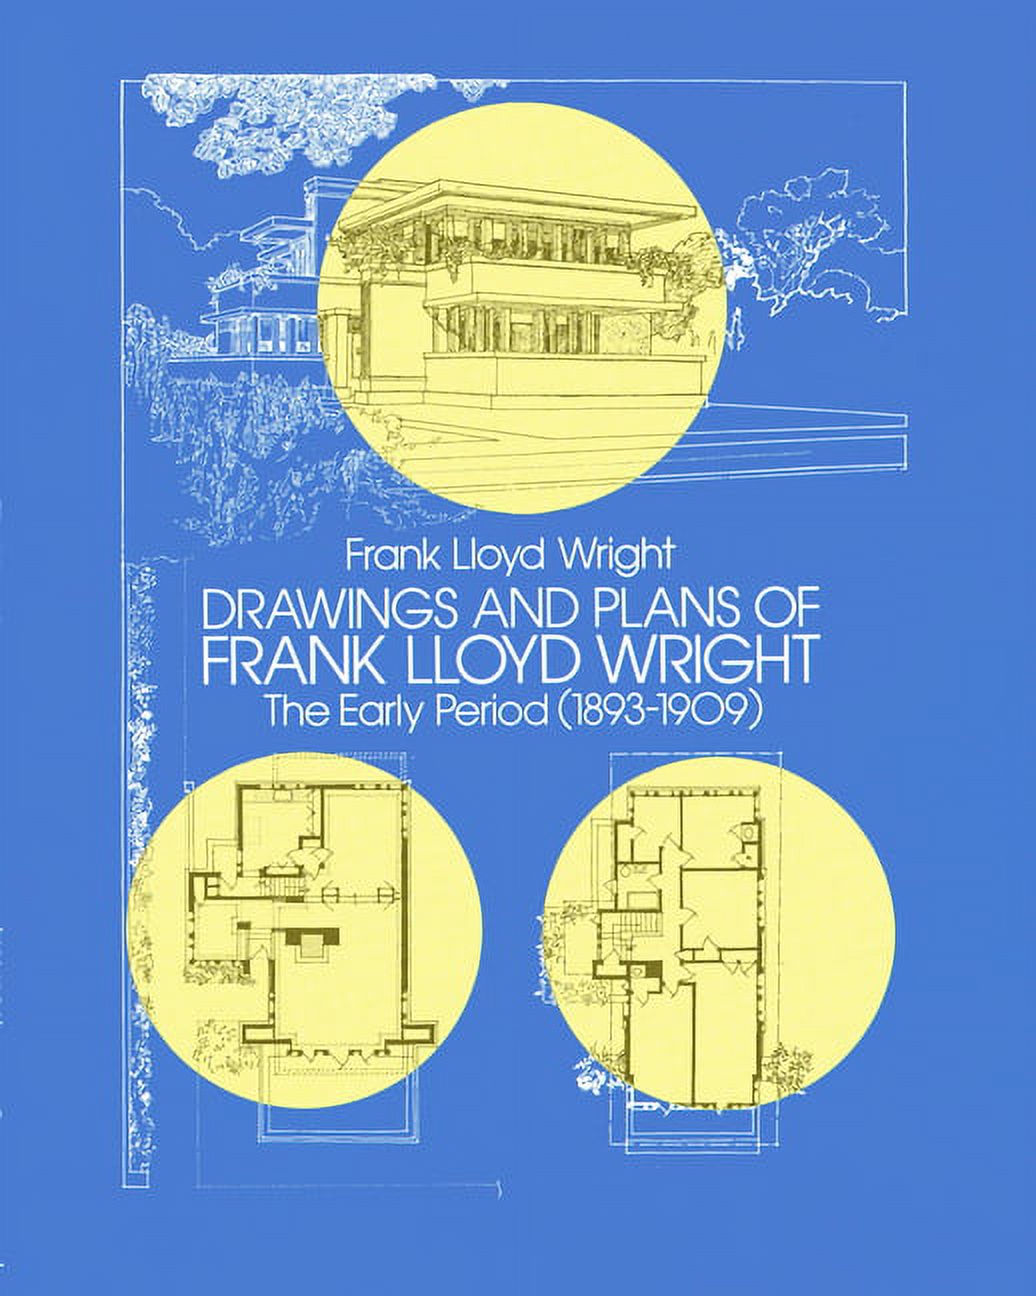 Frank　Wright:　Early　Drawings　Dover　(Paperback)　Lloyd　(1893-1909)　Plans　Architecture:　and　Period　of　The